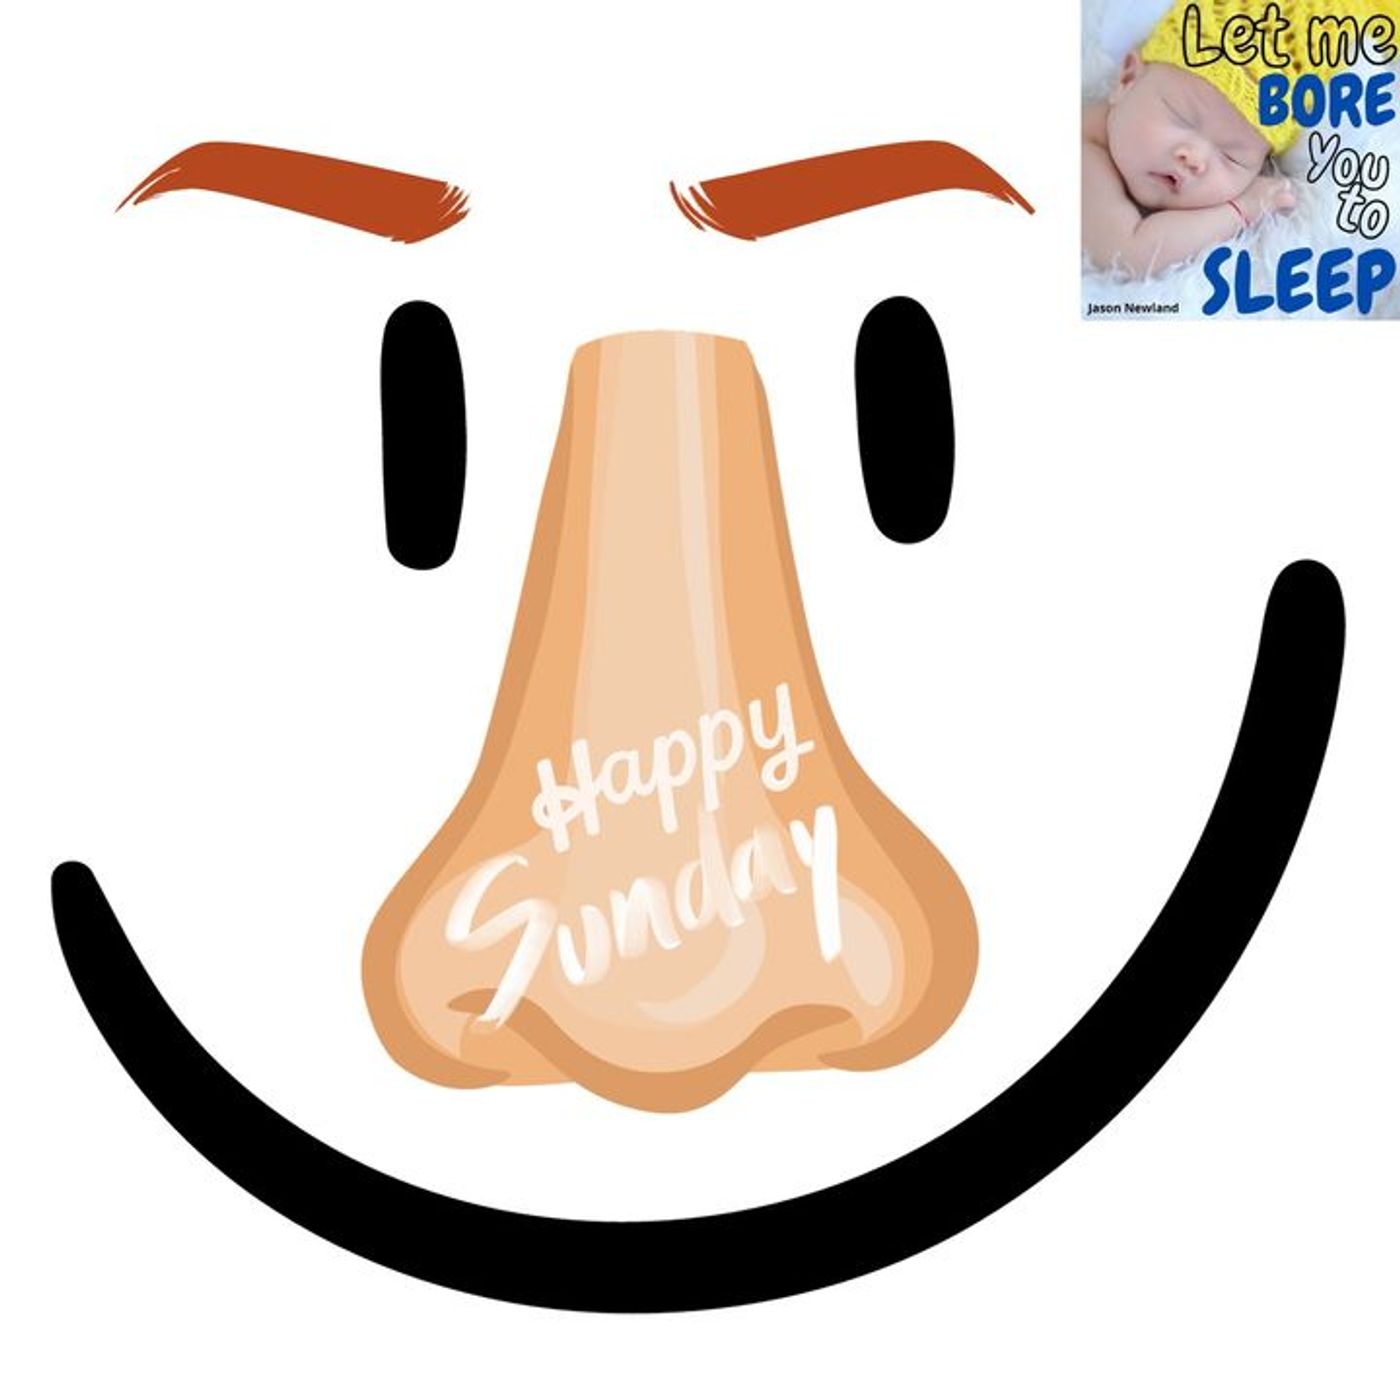 (10 hours) #1049 - Happy Sunday - Let me bore you to sleep